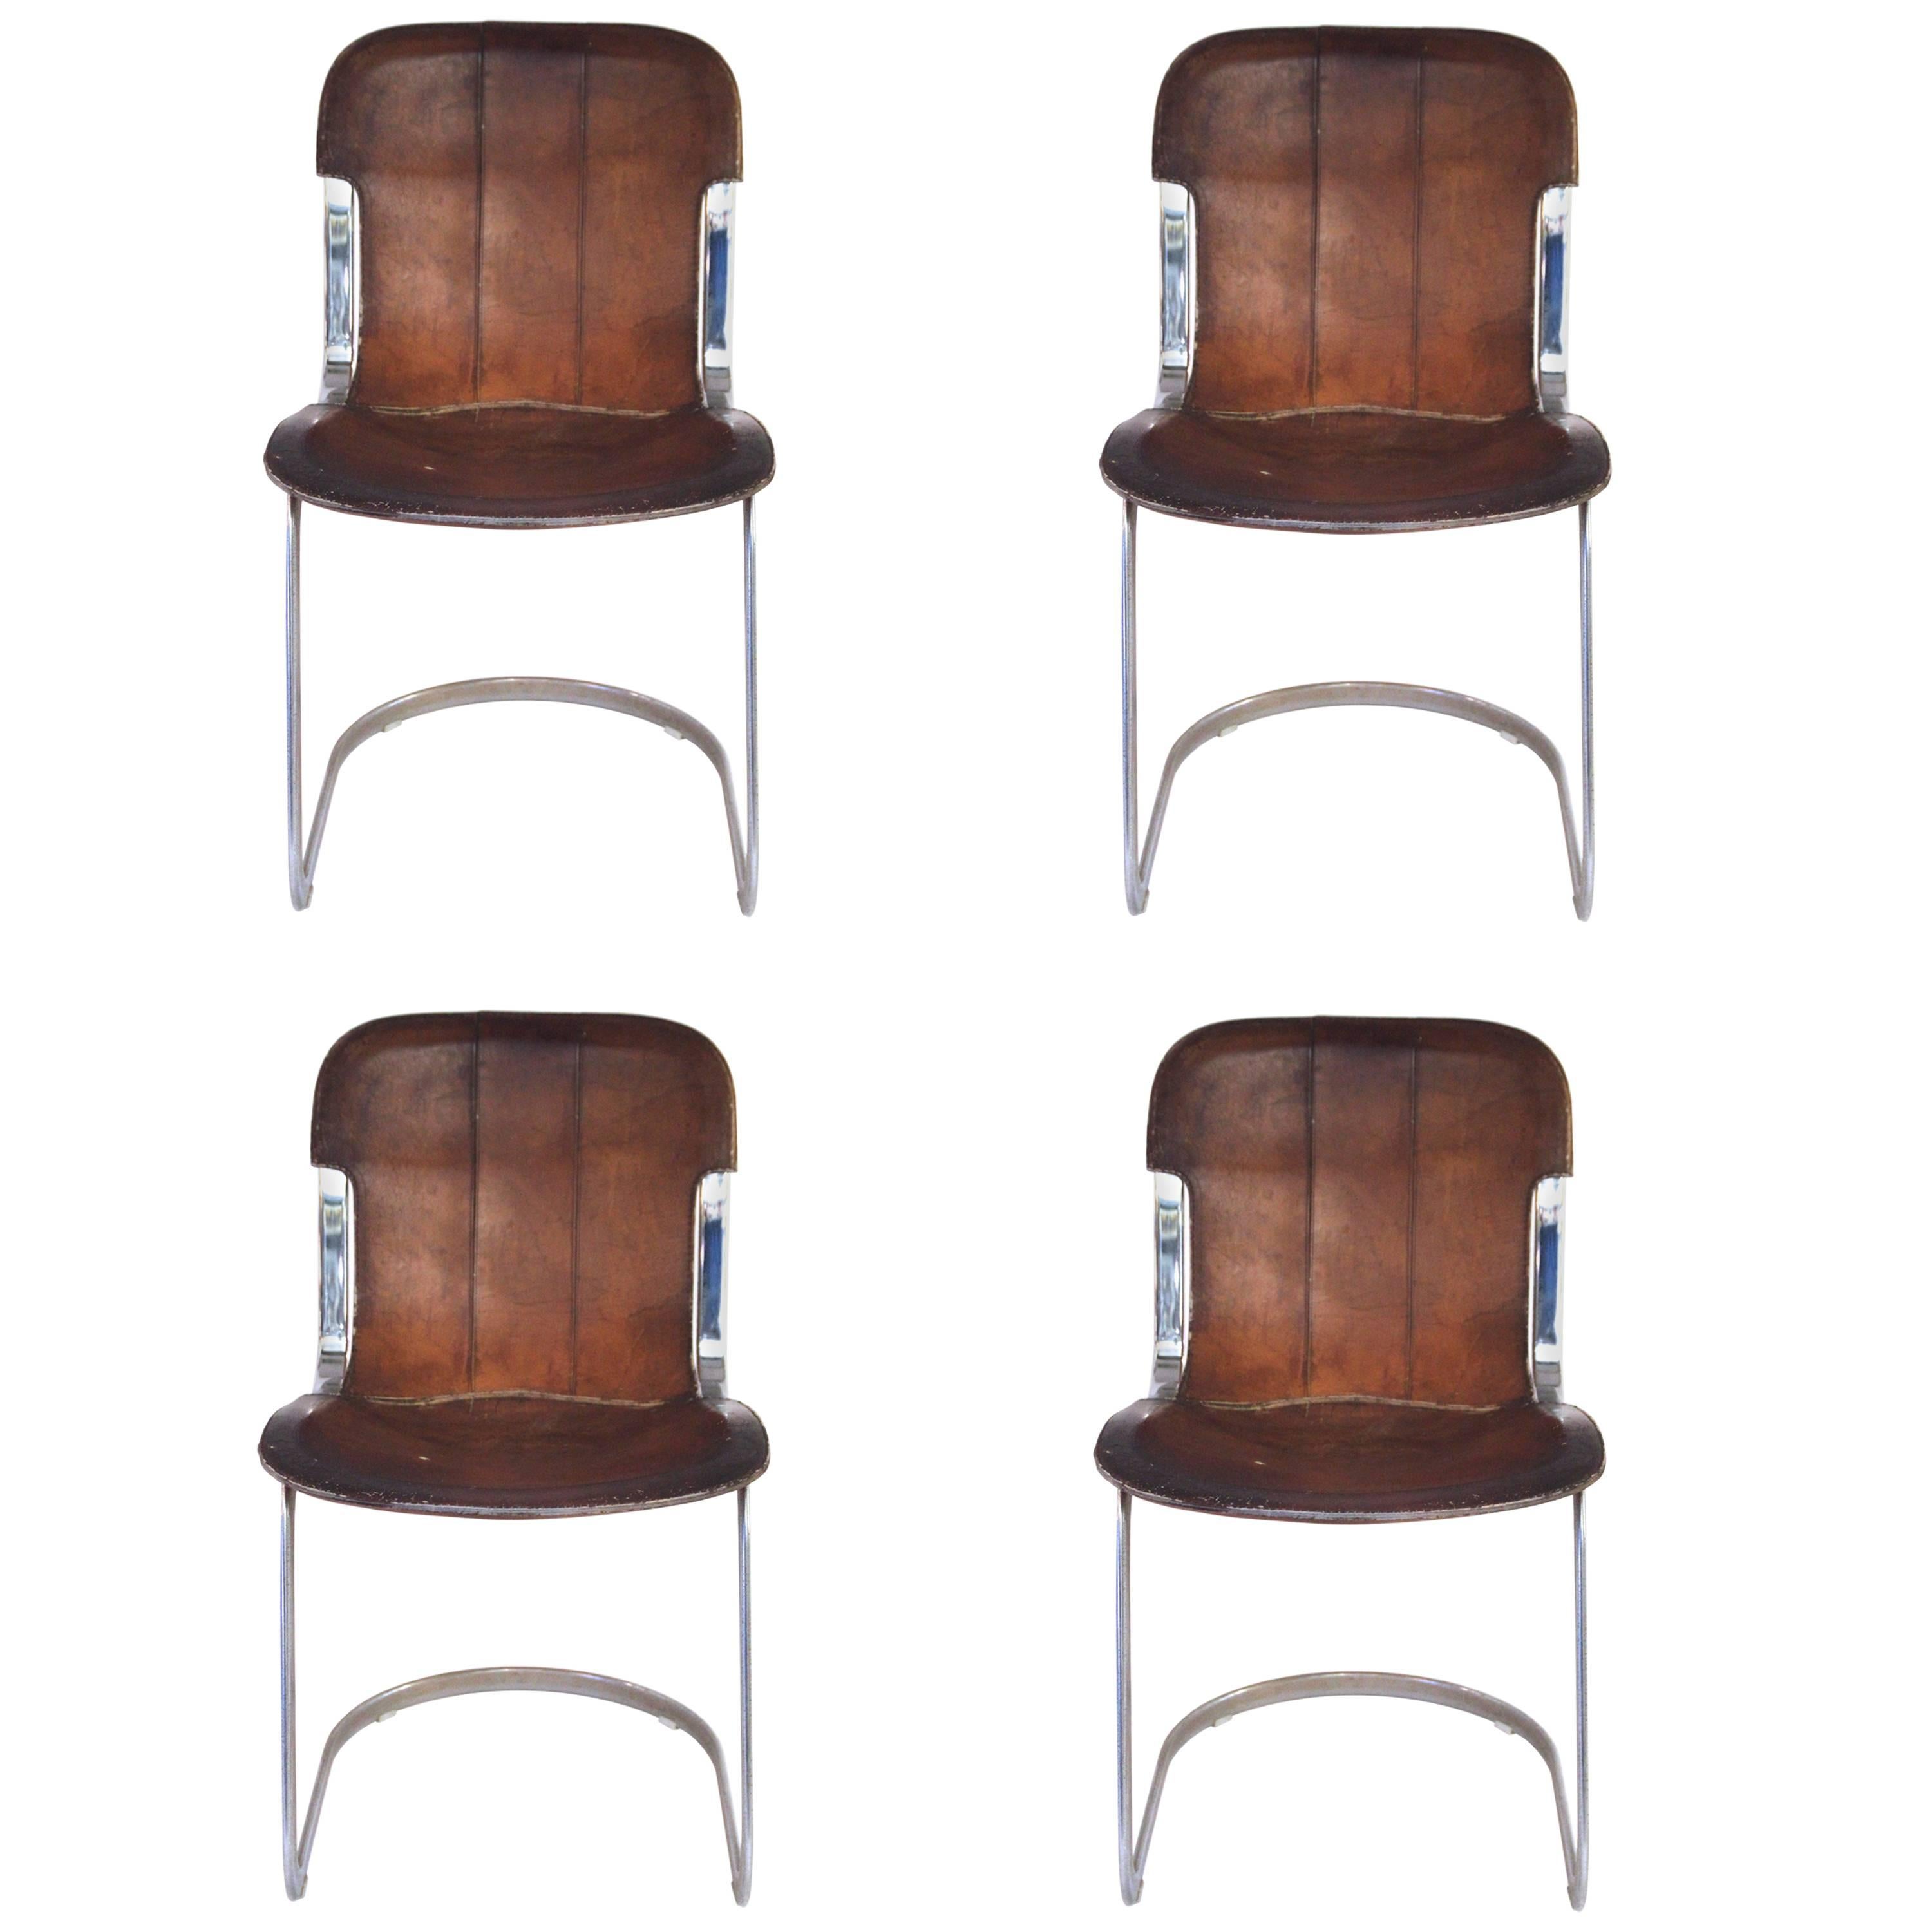 Maison Jansen, Set of Four Chairs, Metal and Leather, circa 1970, France